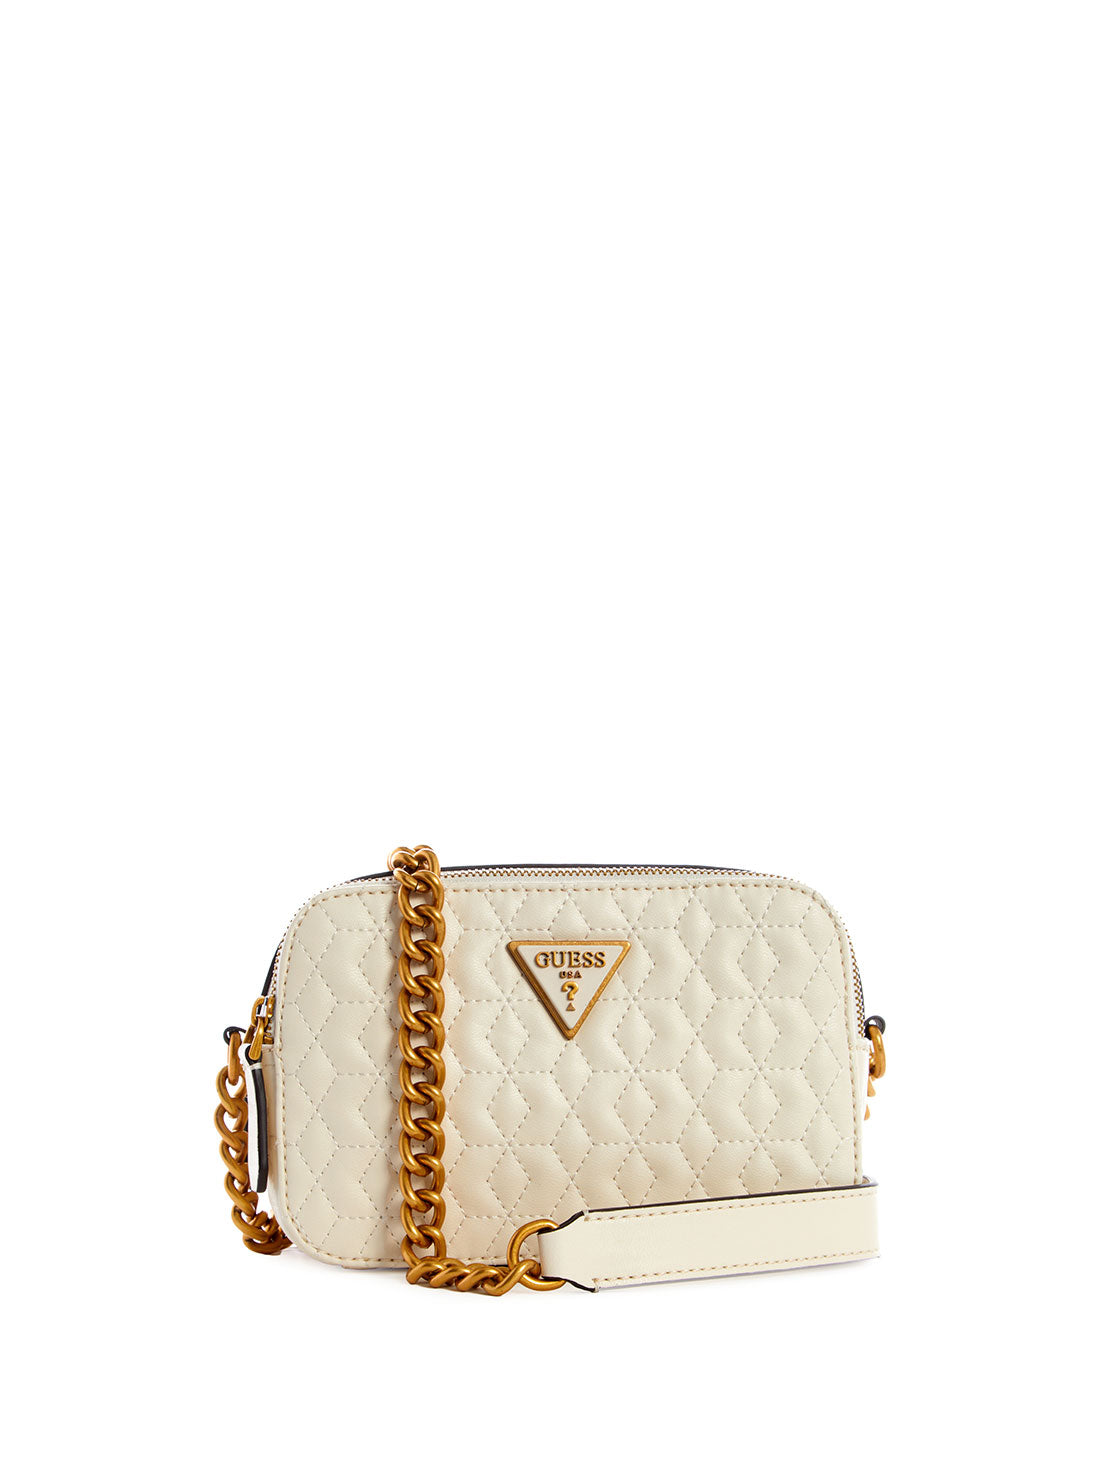 GUESS Womens White Quilted Noelle Crossbody Camera Bag DB787914 Front View